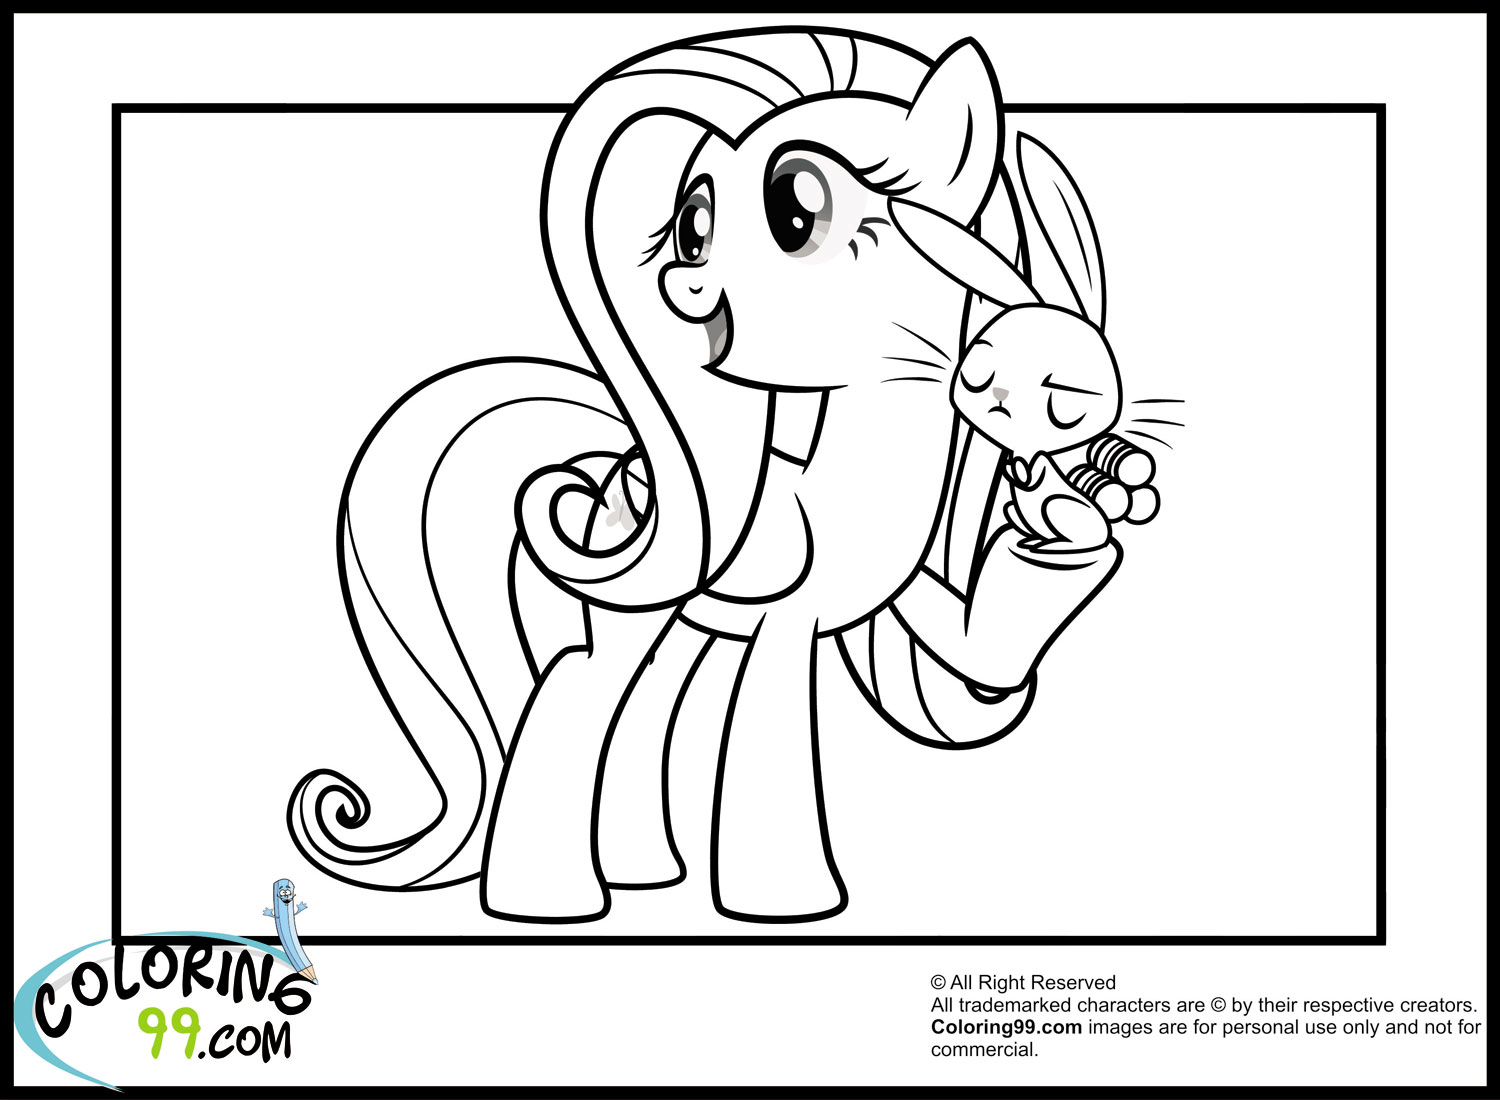 Download My Little Pony Fluttershy Coloring Pages | Team colors